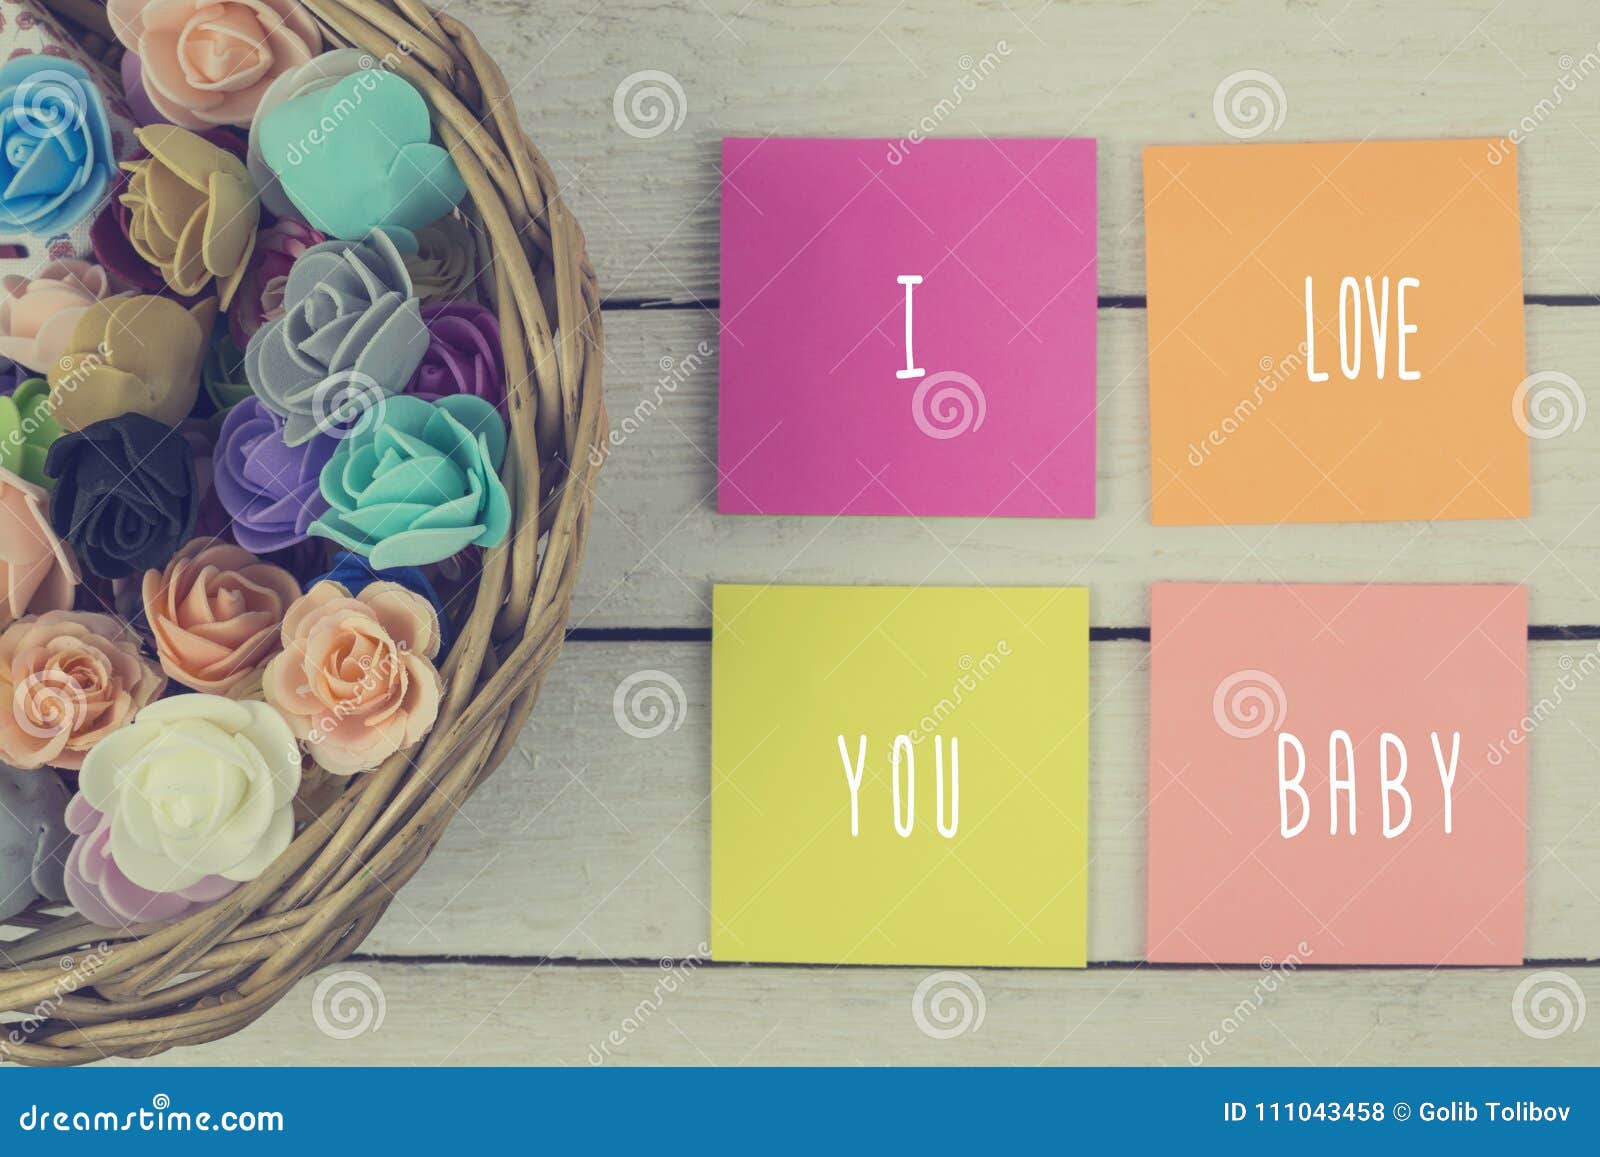 475 I Love You Baby Photos Free Royalty Free Stock Photos From Dreamstime